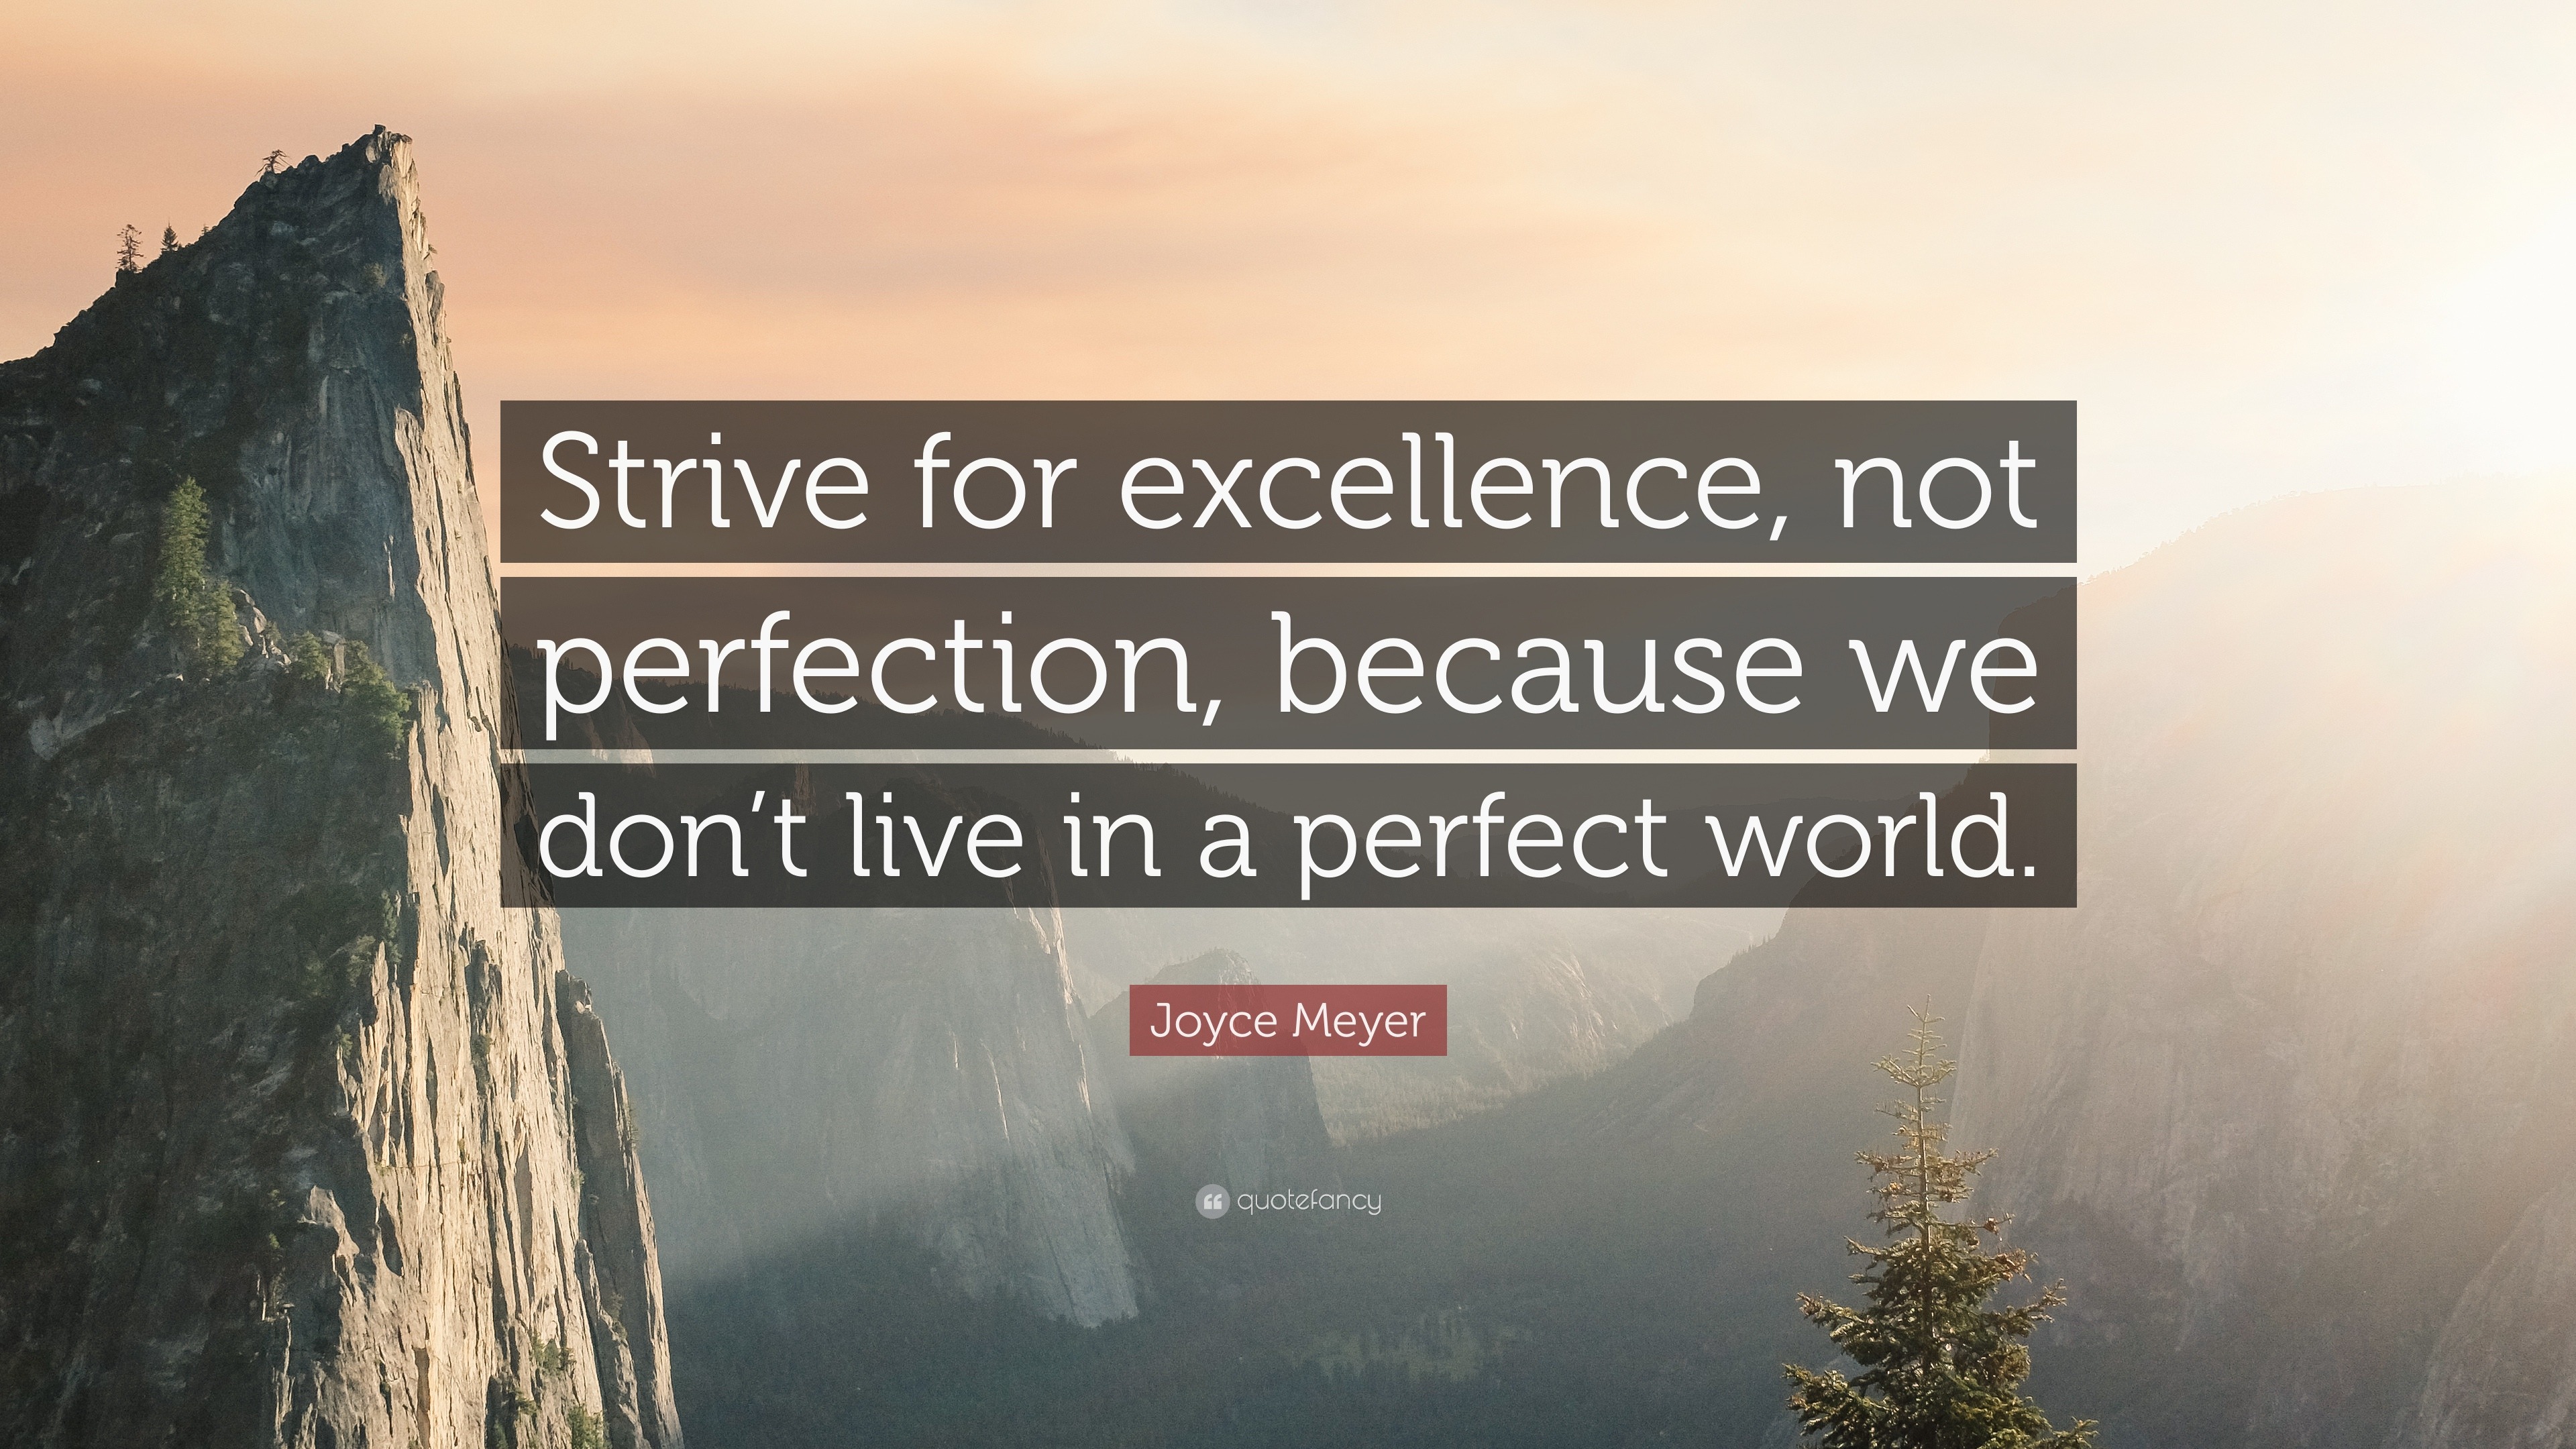 Joyce Meyer Quote: “Strive for excellence, not perfection, because we